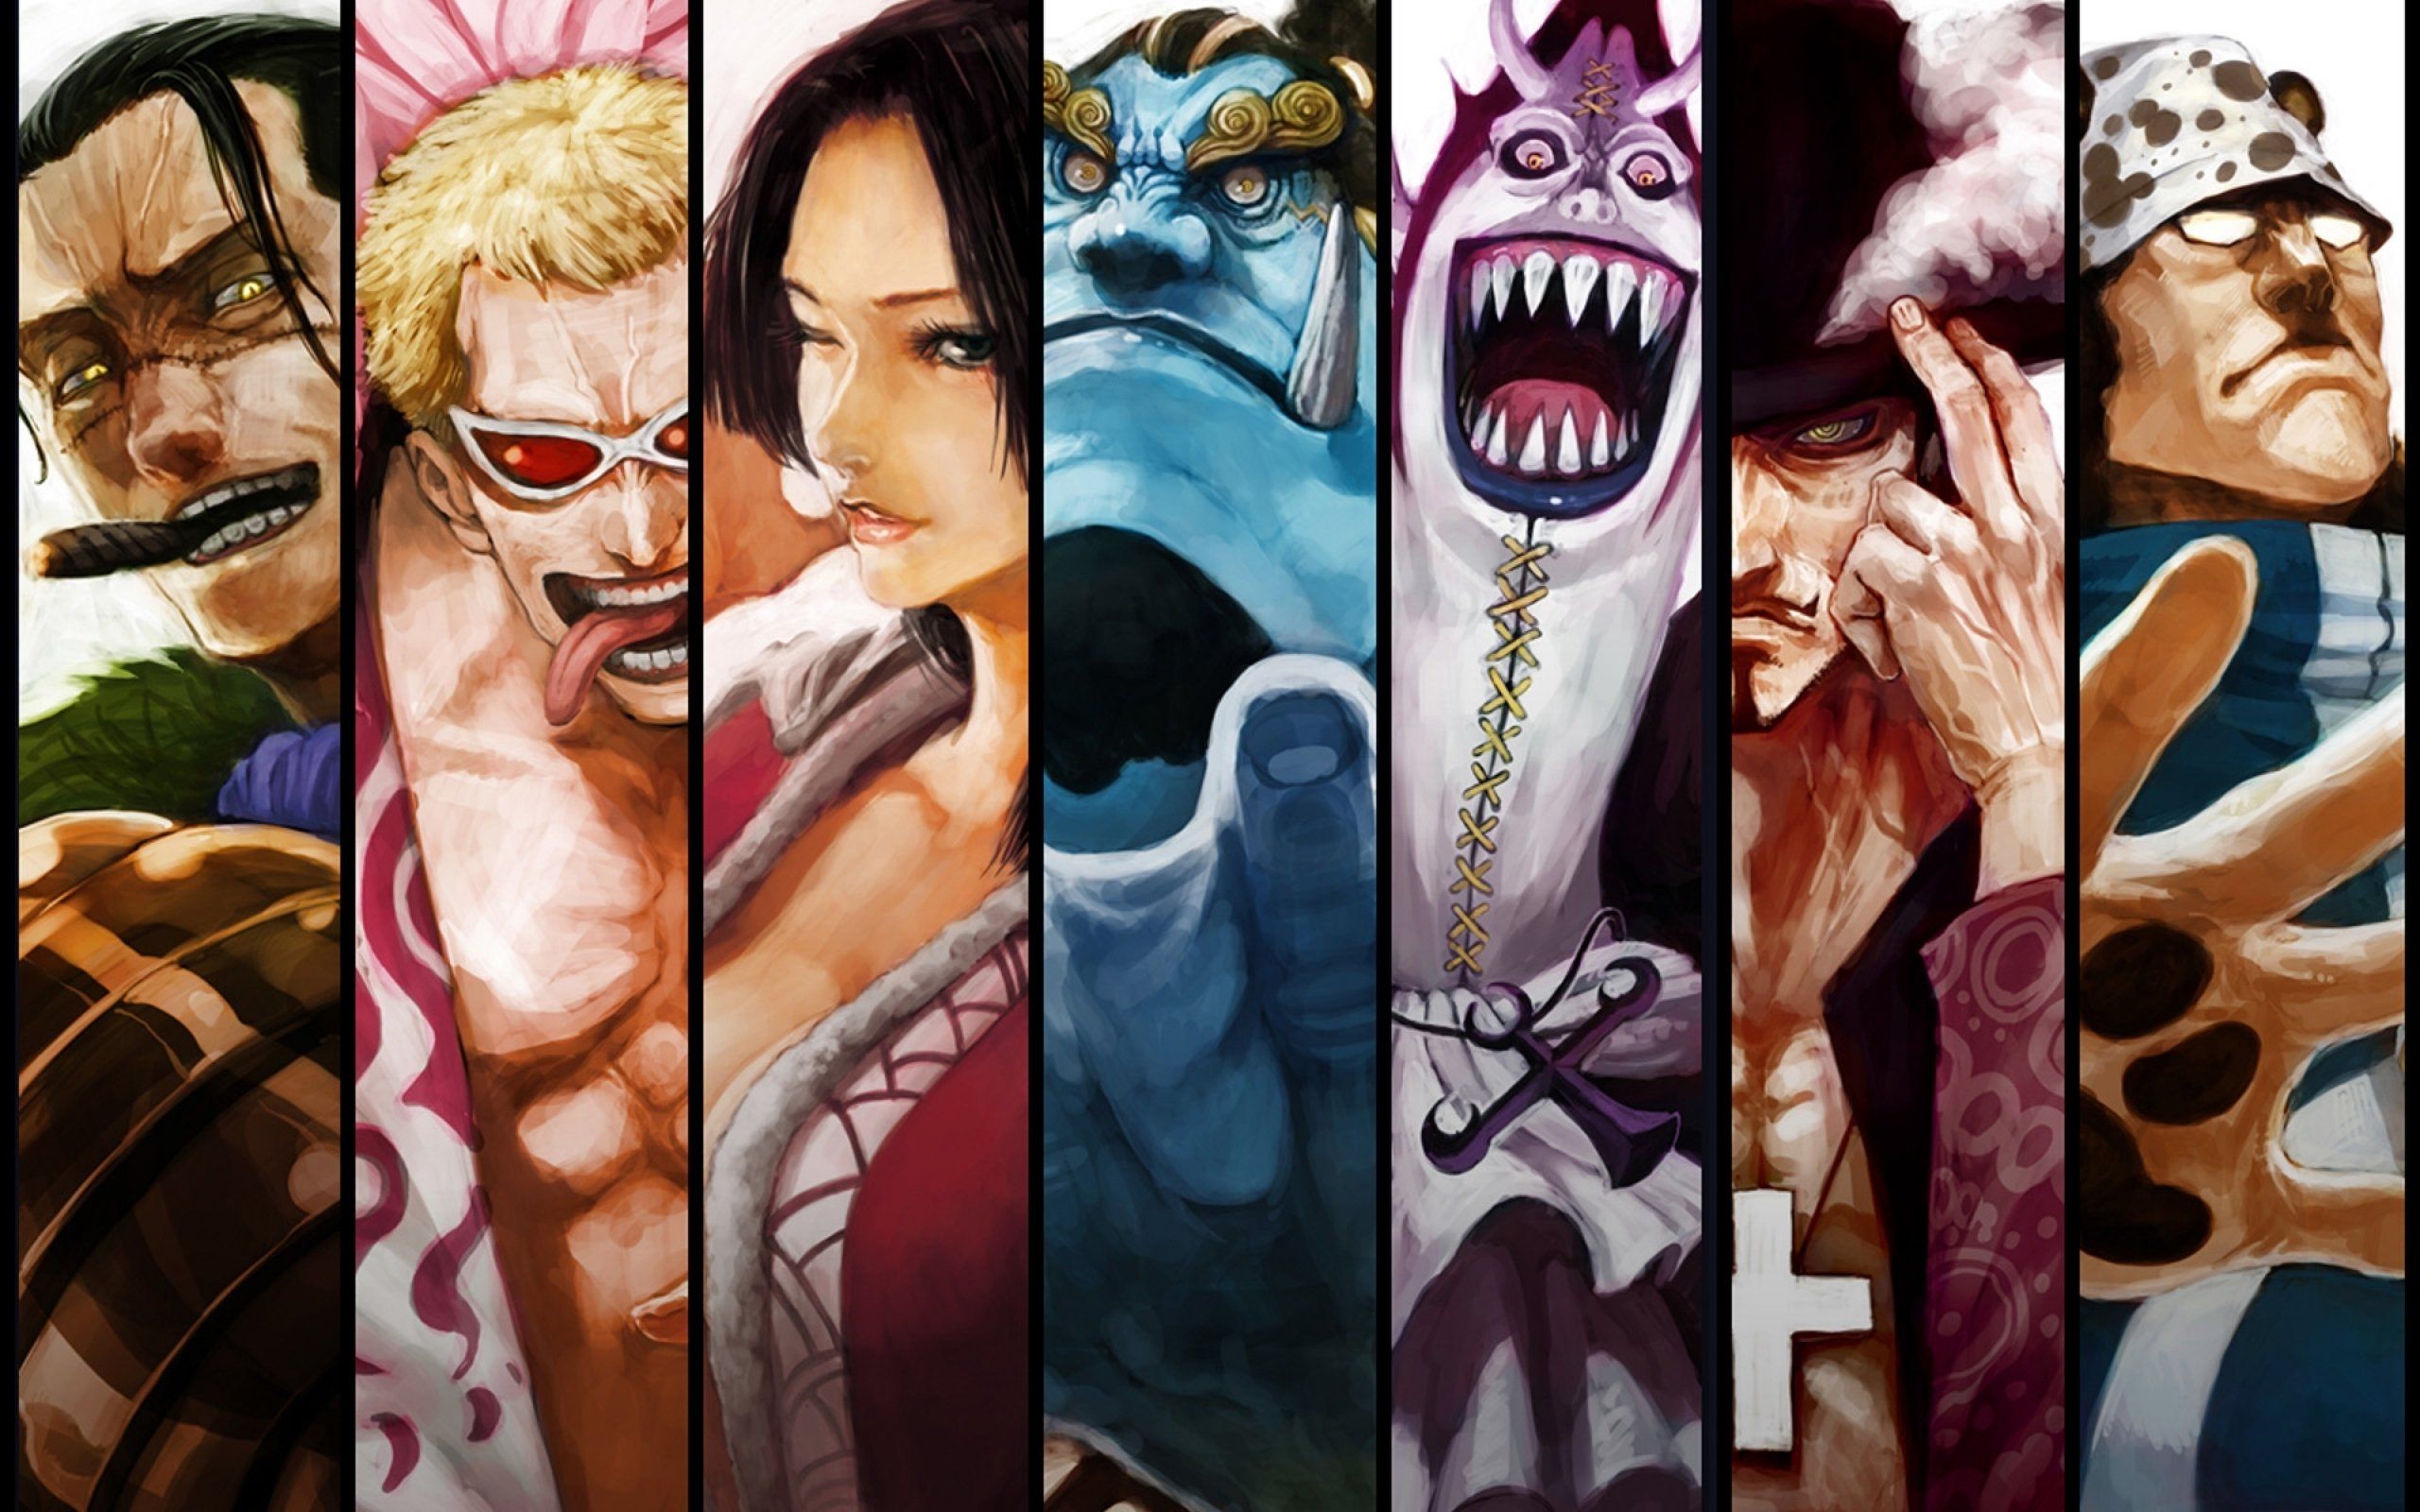 Free download One Piece Characters wallpaper HD Wallpaper Ultra HD Wallpaper [2560x1600] for your Desktop, Mobile & Tablet. Explore 4K One Piece Wallpaper. One Piece Wallpaper HD, 4K Anime